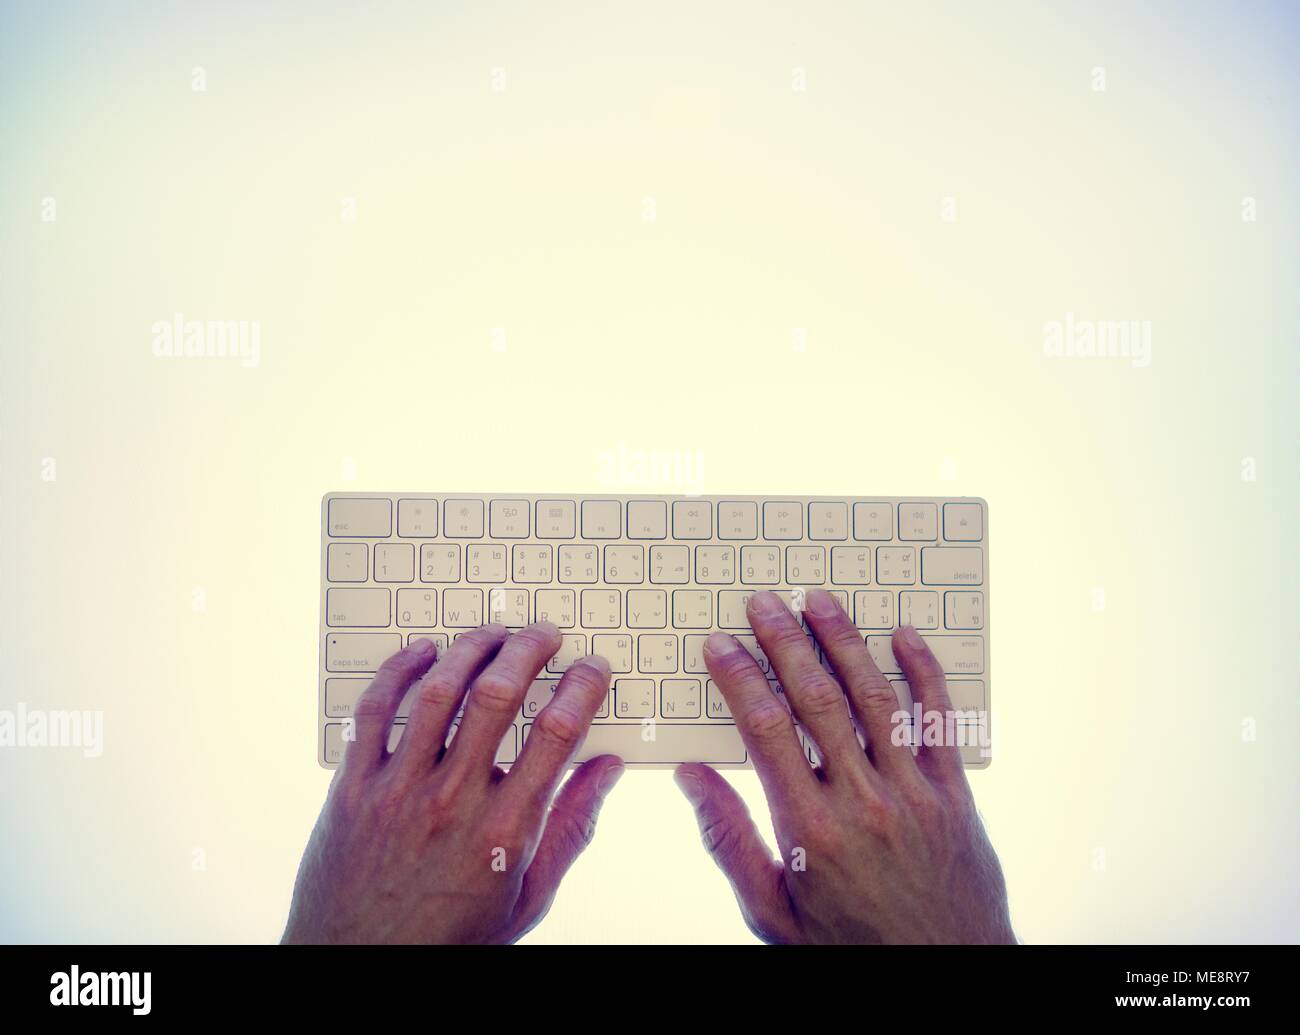 Business person typing Stock Photo